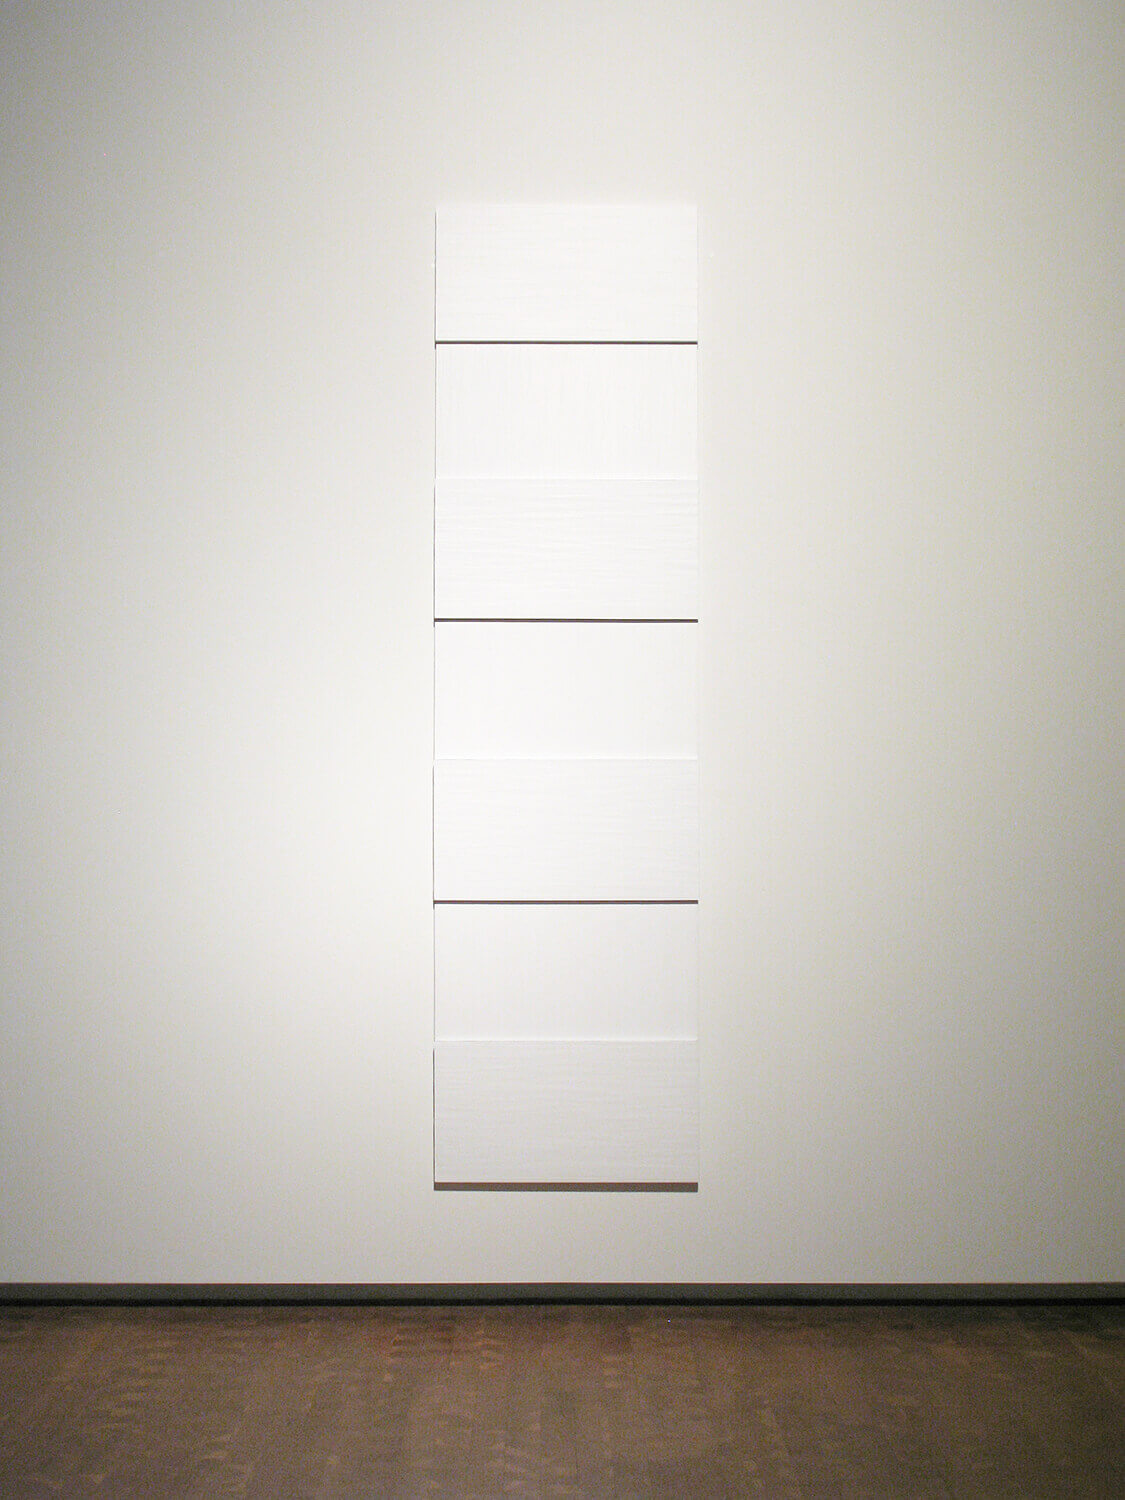 Untitled 1963<br>Acrylic, japanese paper on Mesonite board<br>284.5 x 76.5 x 5 cm